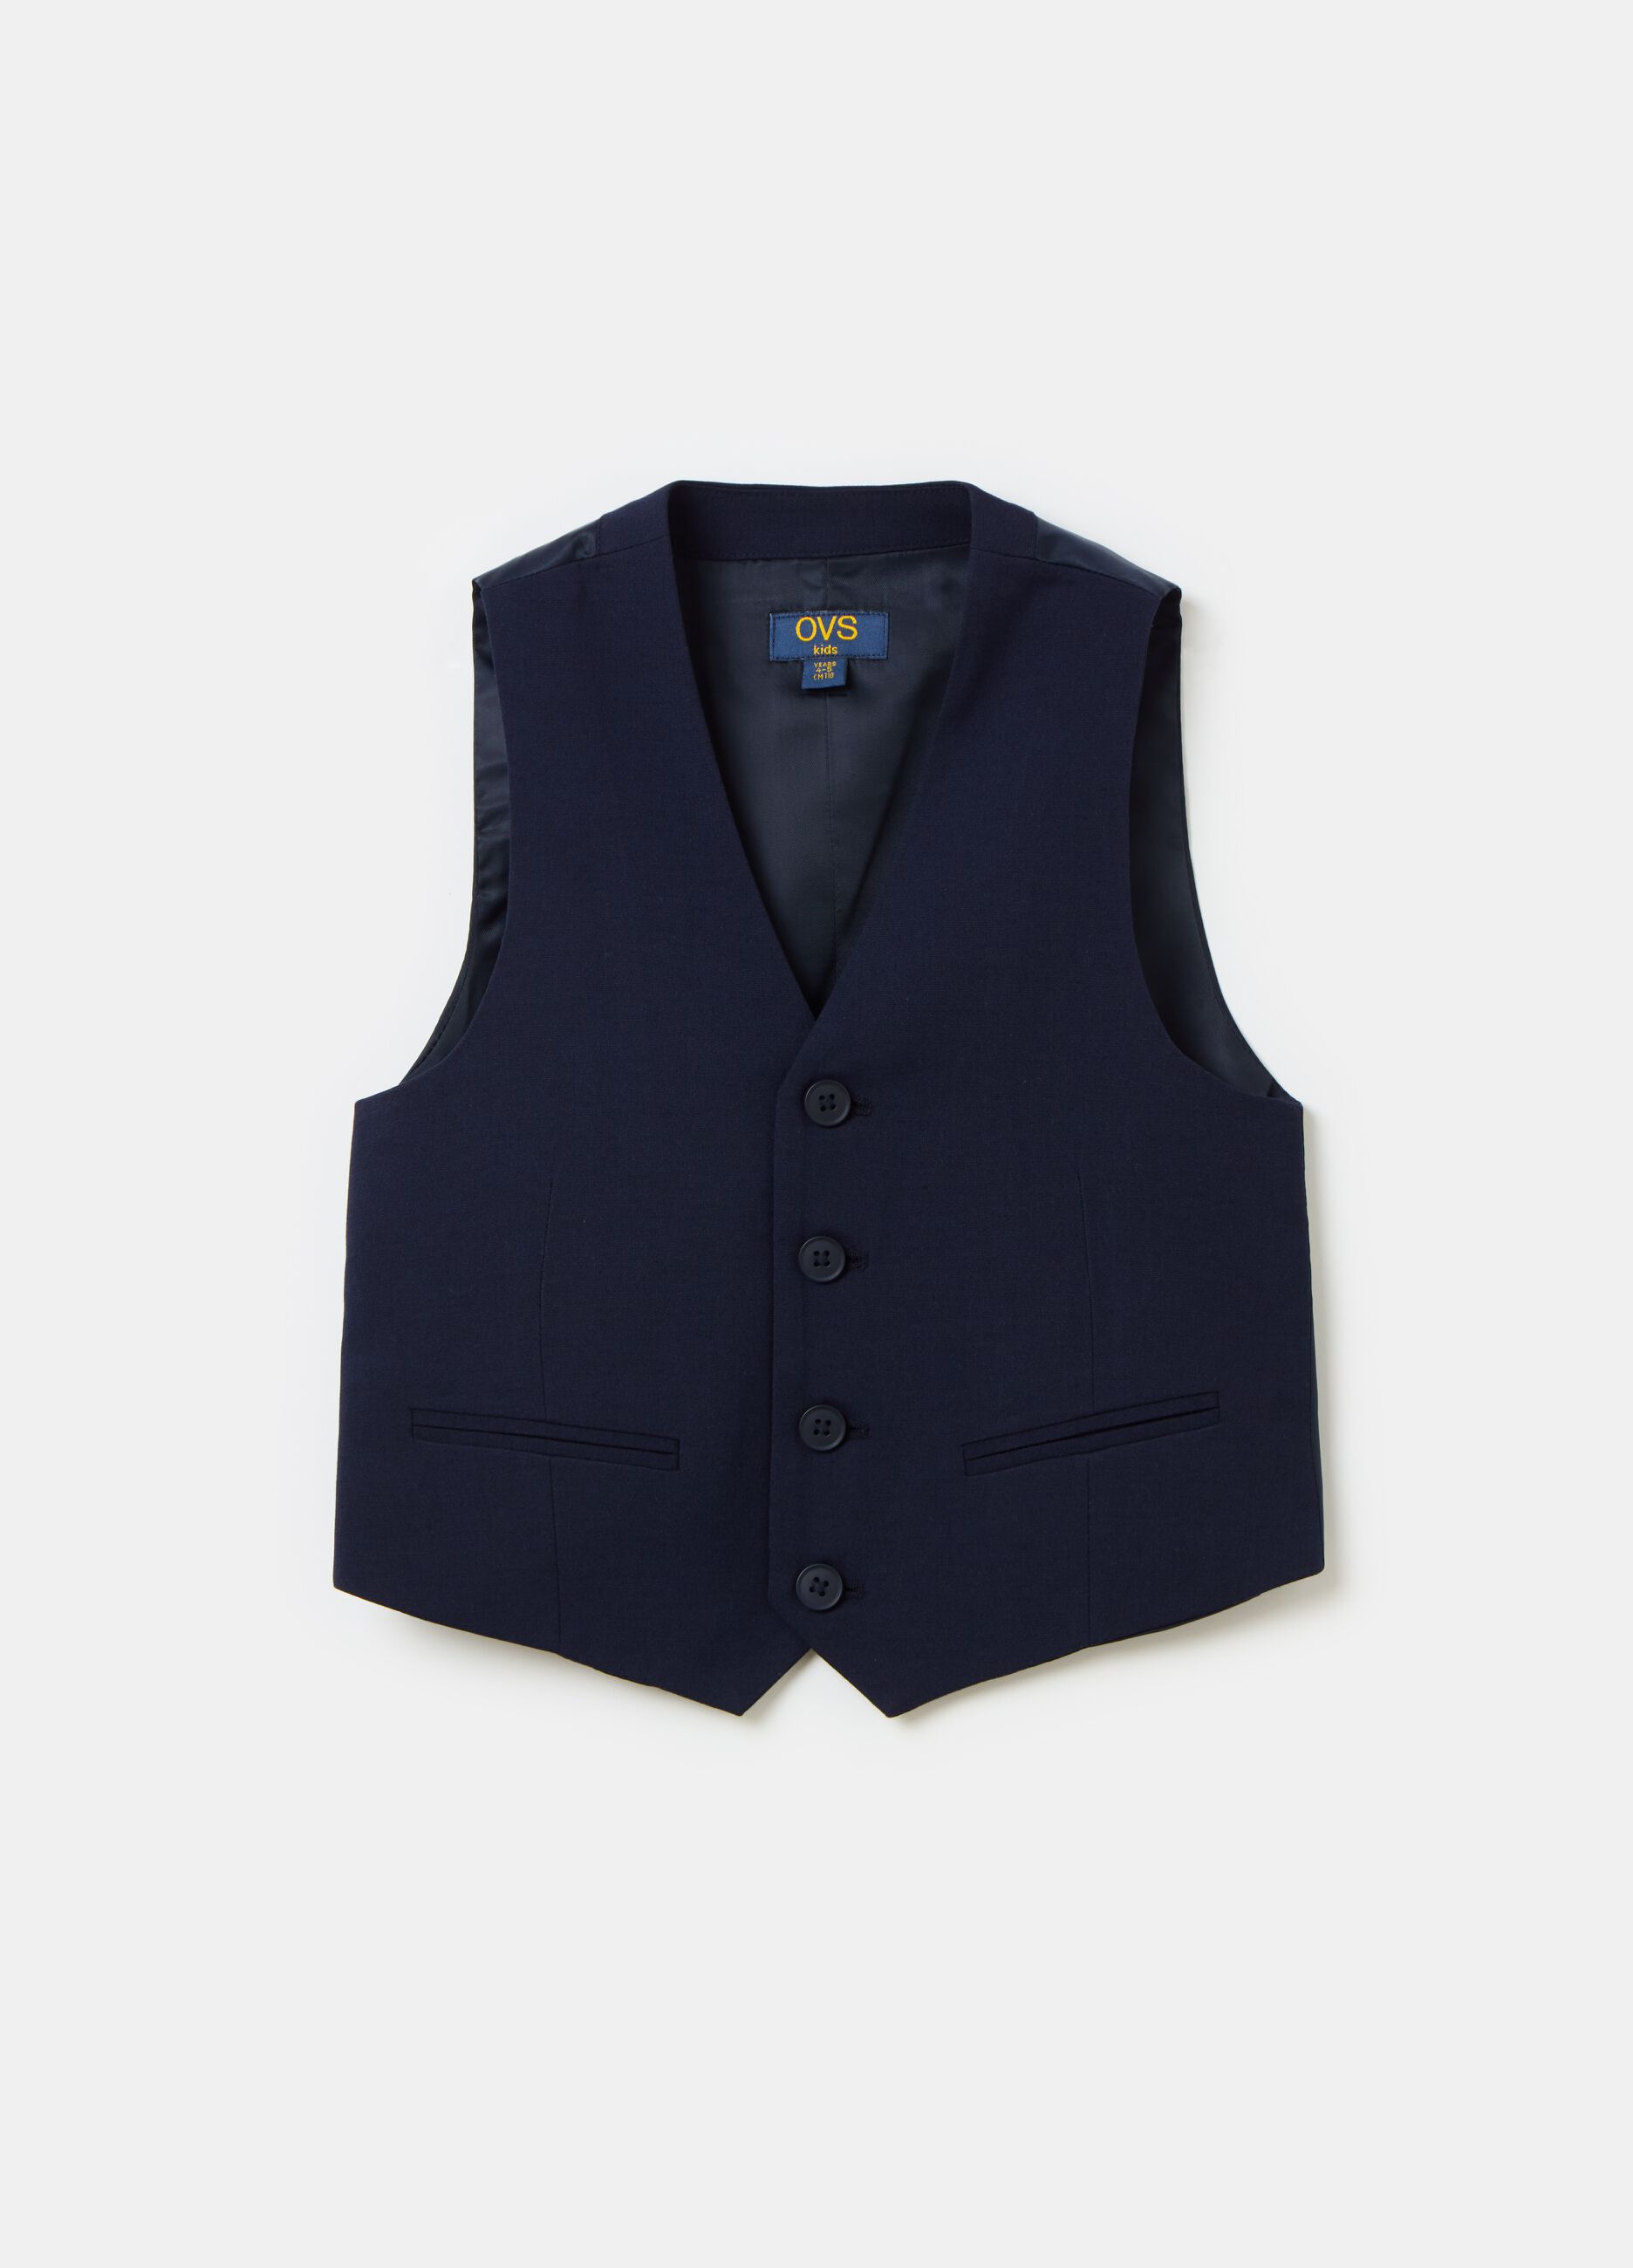 Elegant gilet with buttons